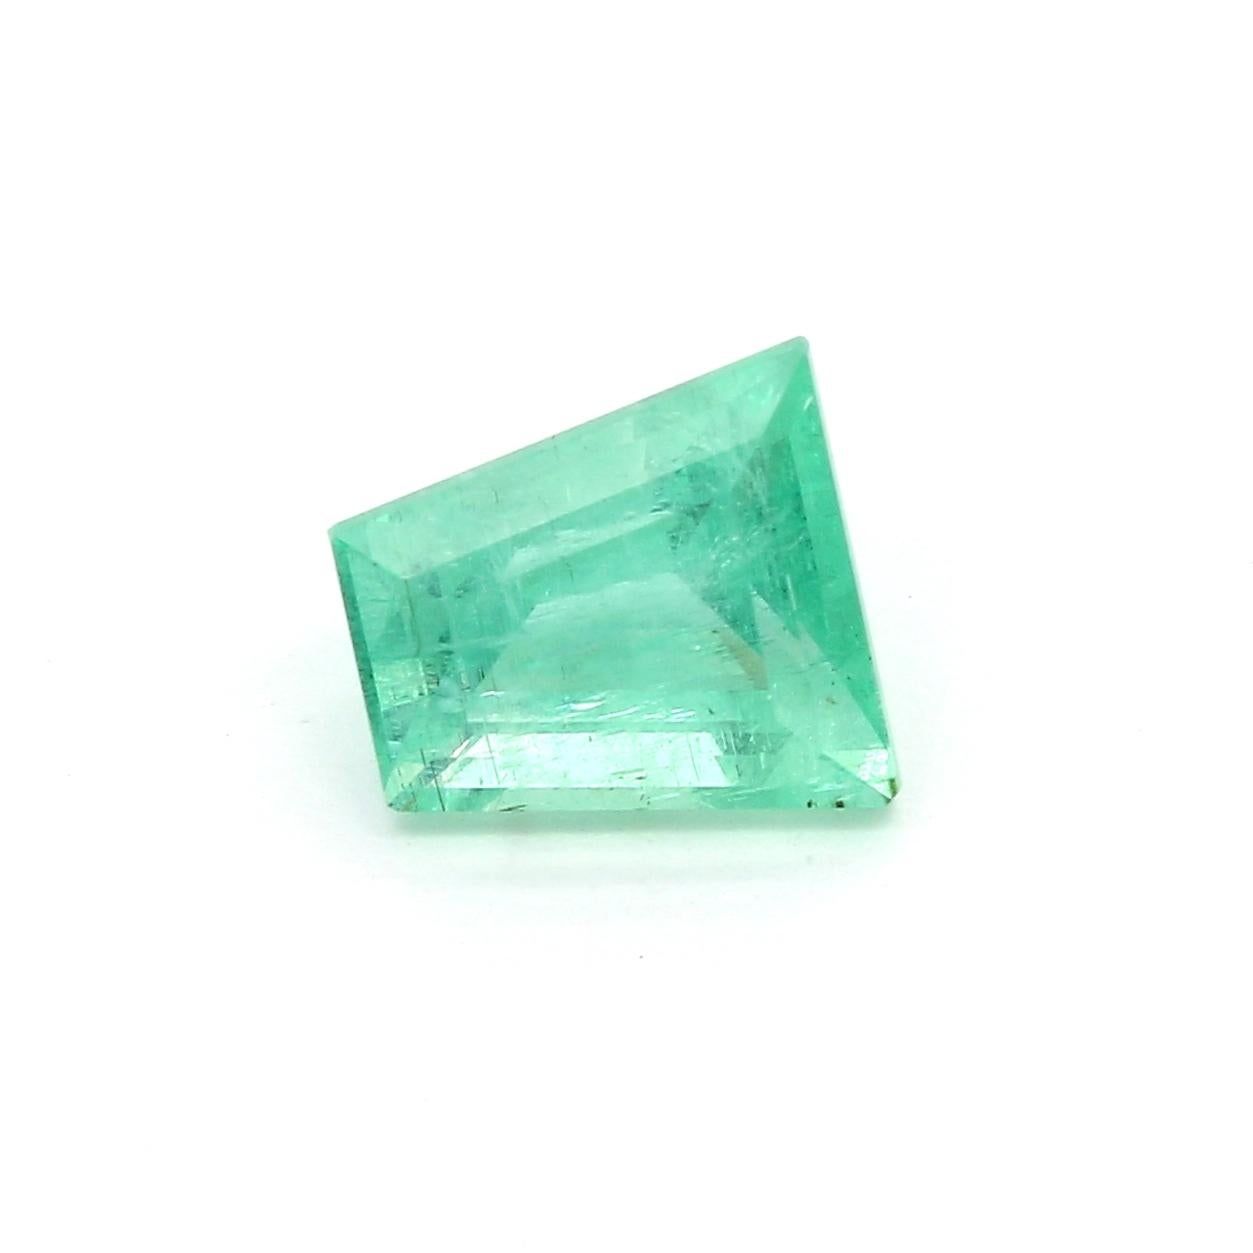 An amazing Russian Emerald which allows jewelers to create a unique piece of wearable art.
This exceptional quality gemstone would make a custom-made jewelry design. Perfect for a Ring or Pendant.

Shape - Trapezoid
Weight - 2.73 ct
Treatment -